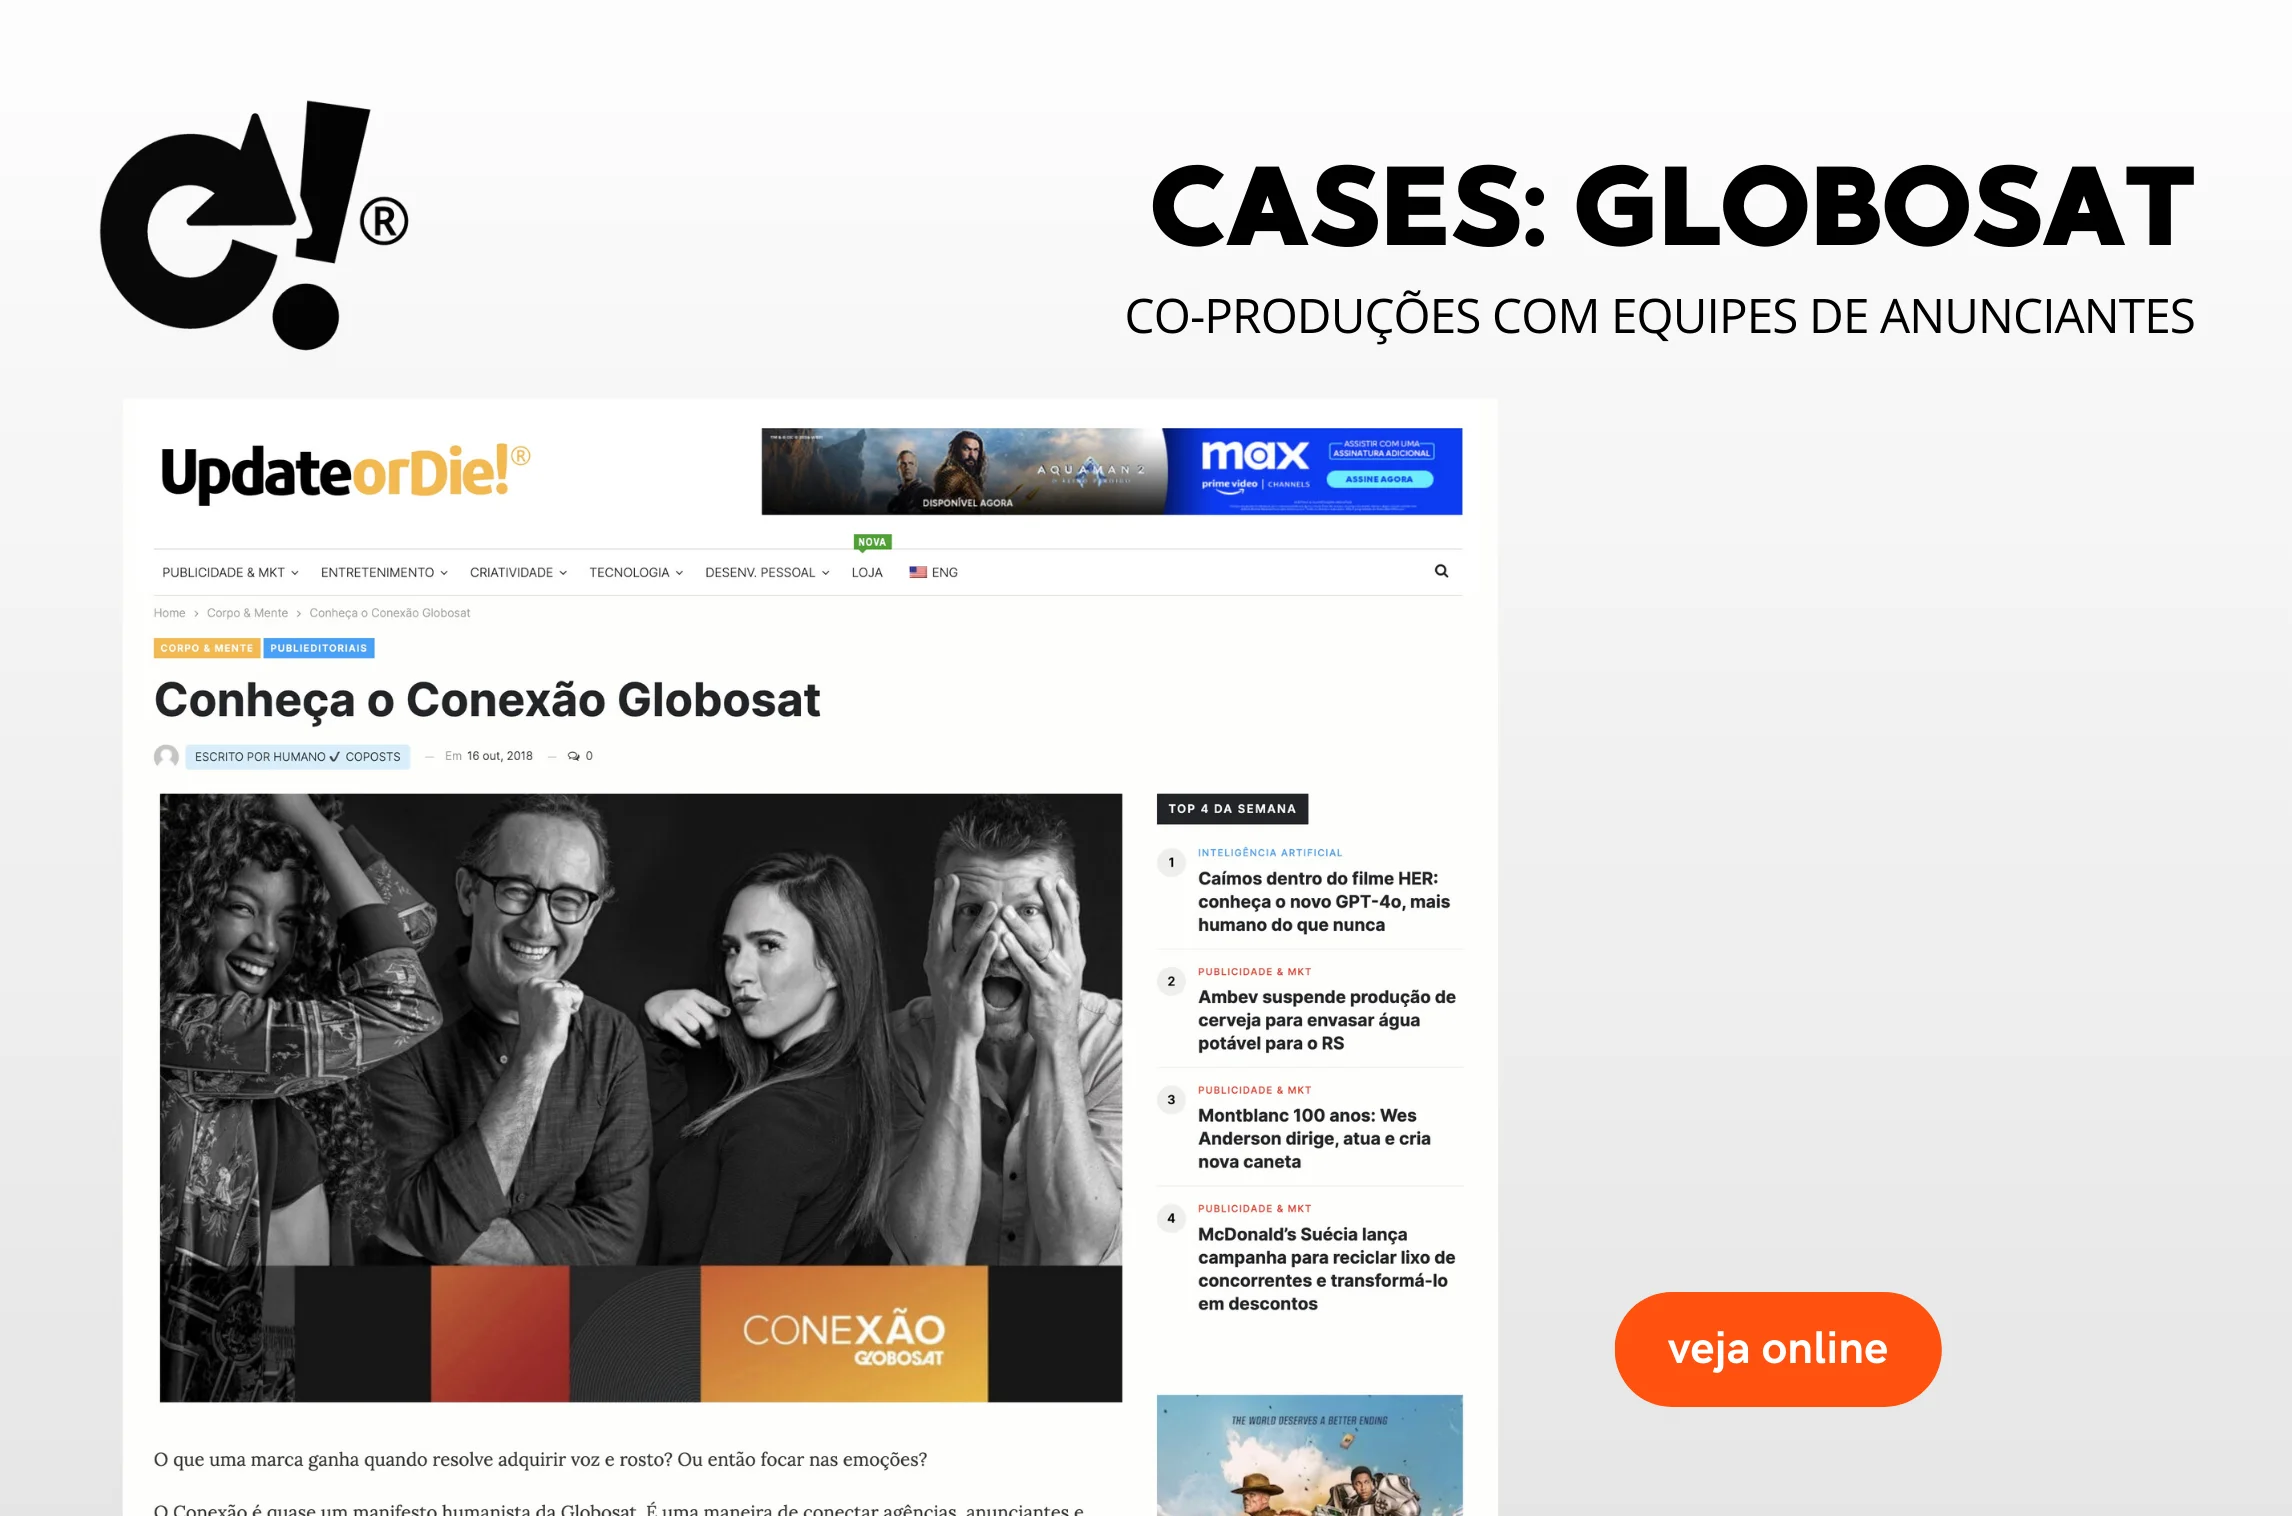 Screenshot of UpdateorDie website featuring a Conexão Globosat article with monochrome image of smiling people and information on co-productions with advertising teams.